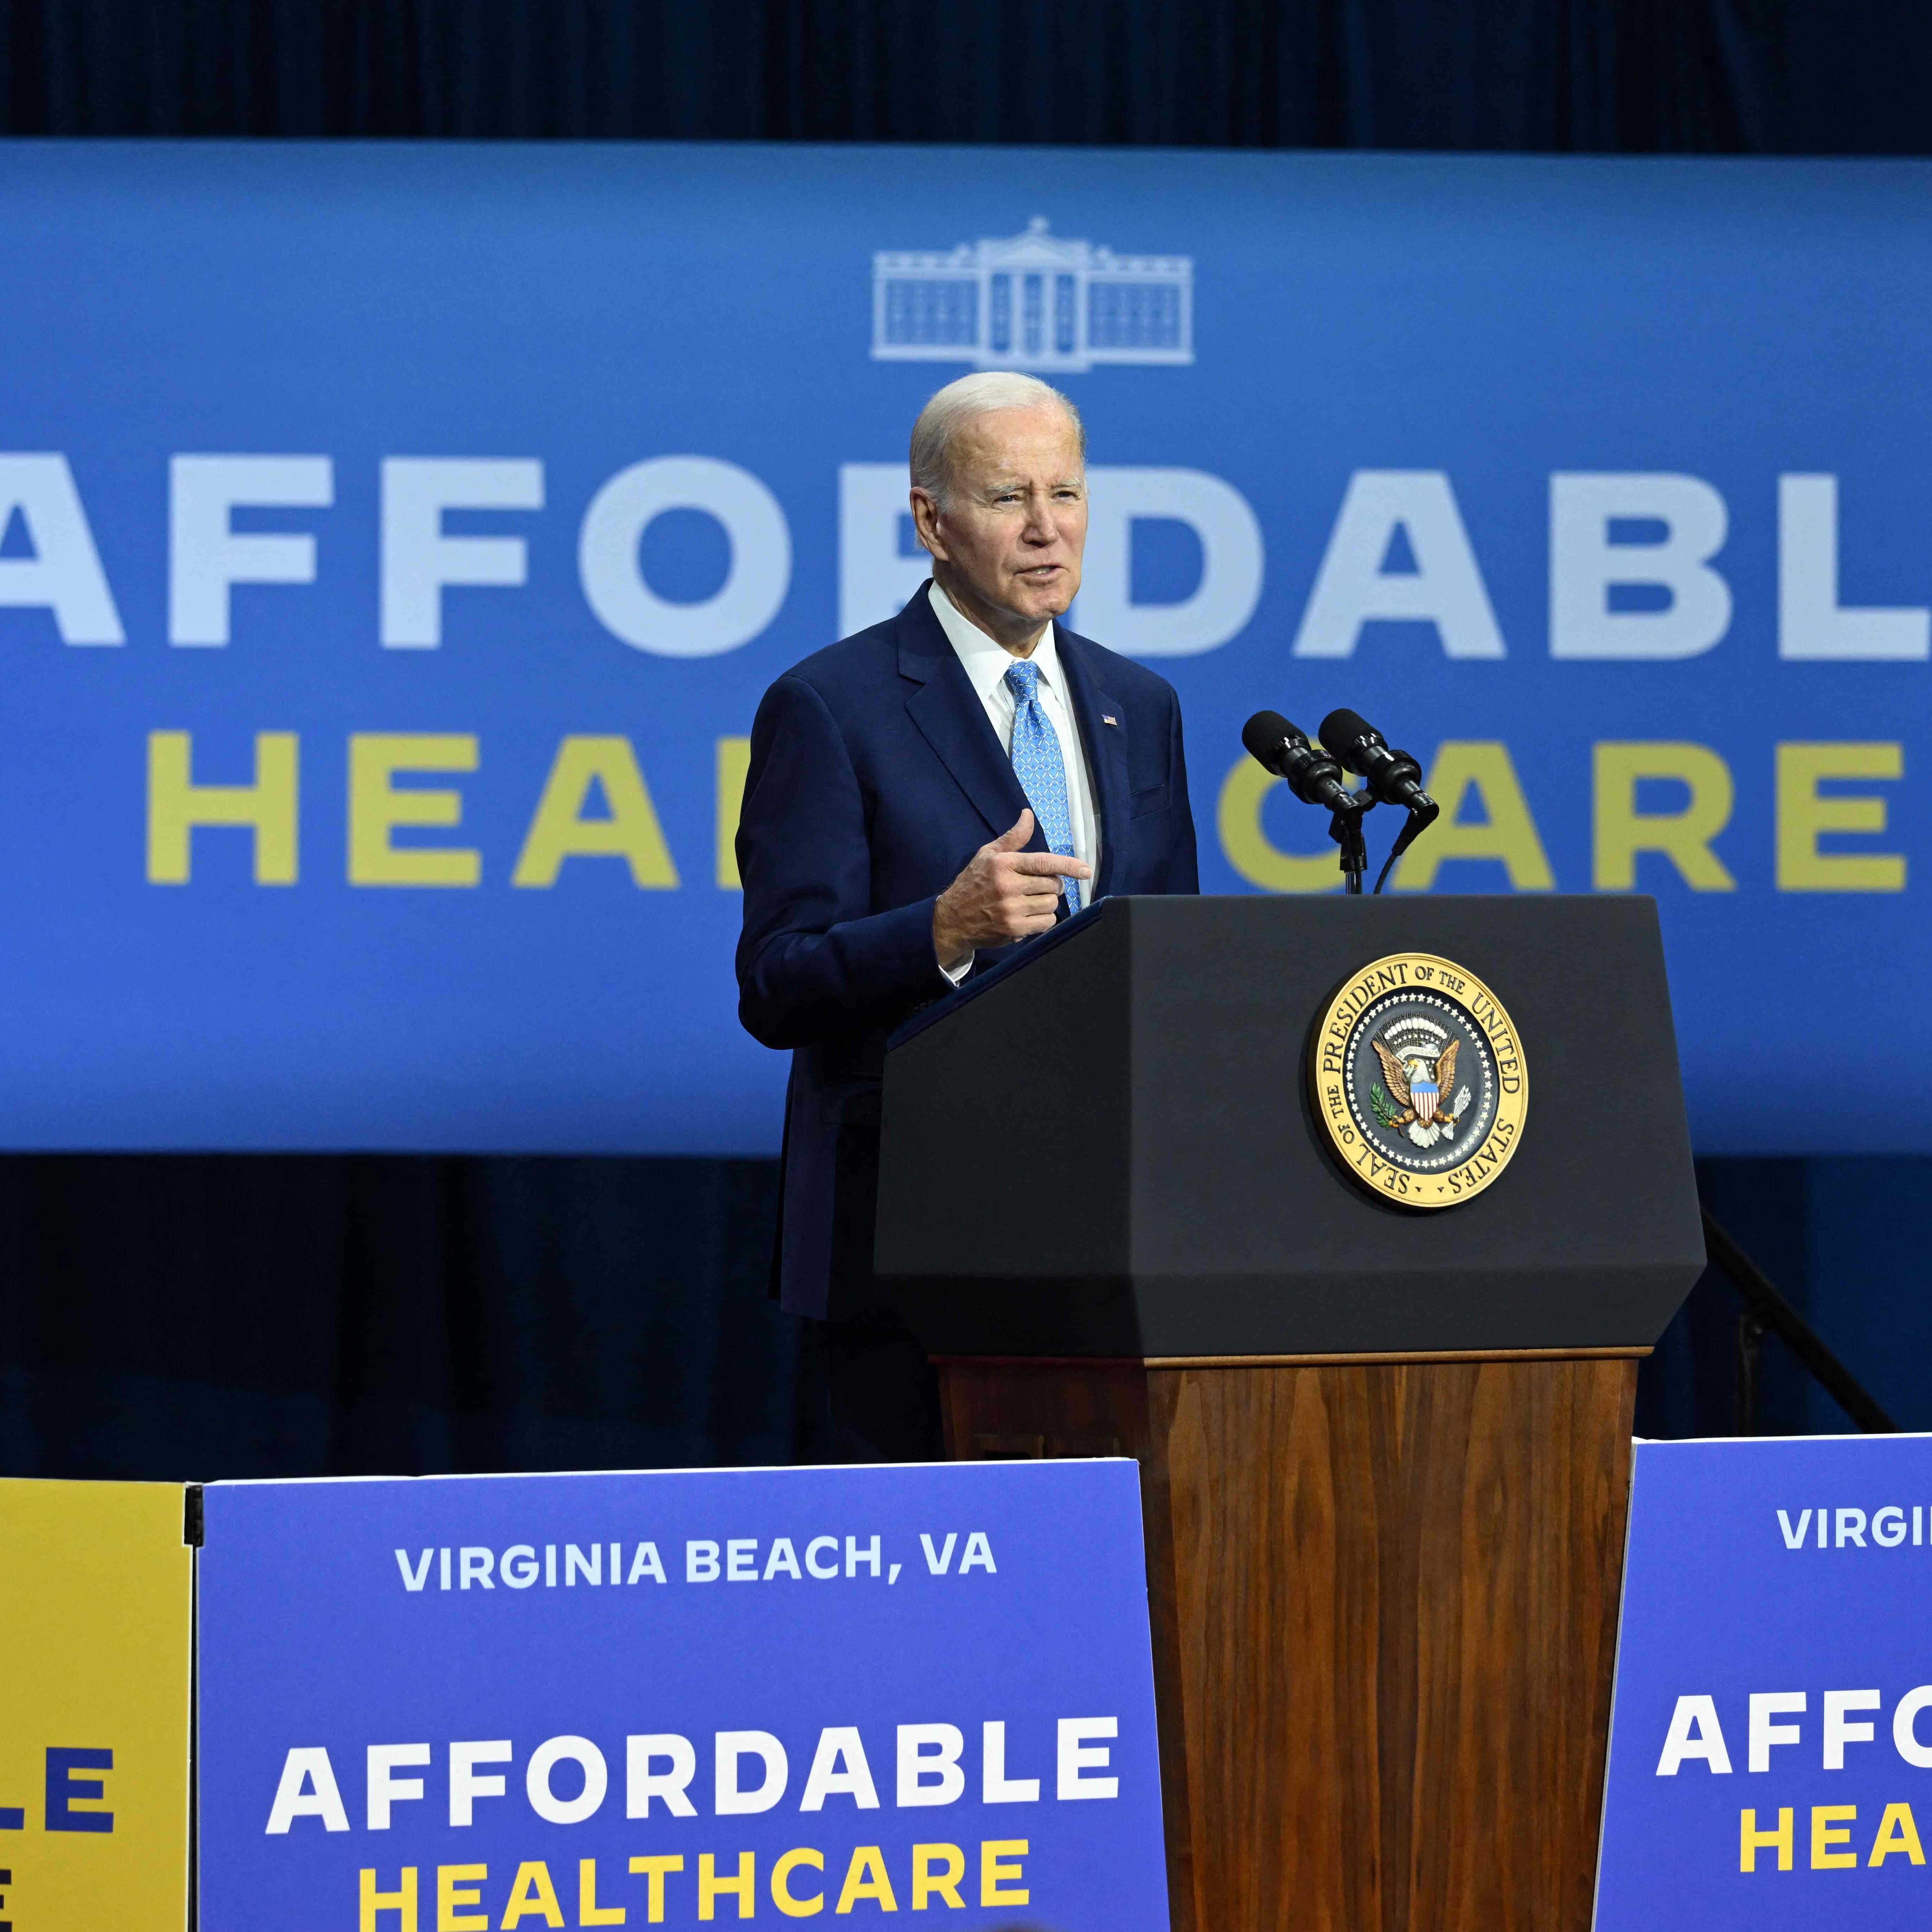 US President Joe Biden delivers remarks on his plan to protect Americans access to affordable health care in Virginia Beach, Virginia, on February 28, 2023. (Photo by SAUL LOEB / AFP) (Photo by SAUL LOEB/AFP via Getty Images) ORIG FILE ID: AFP_33AA2JQ.jpg